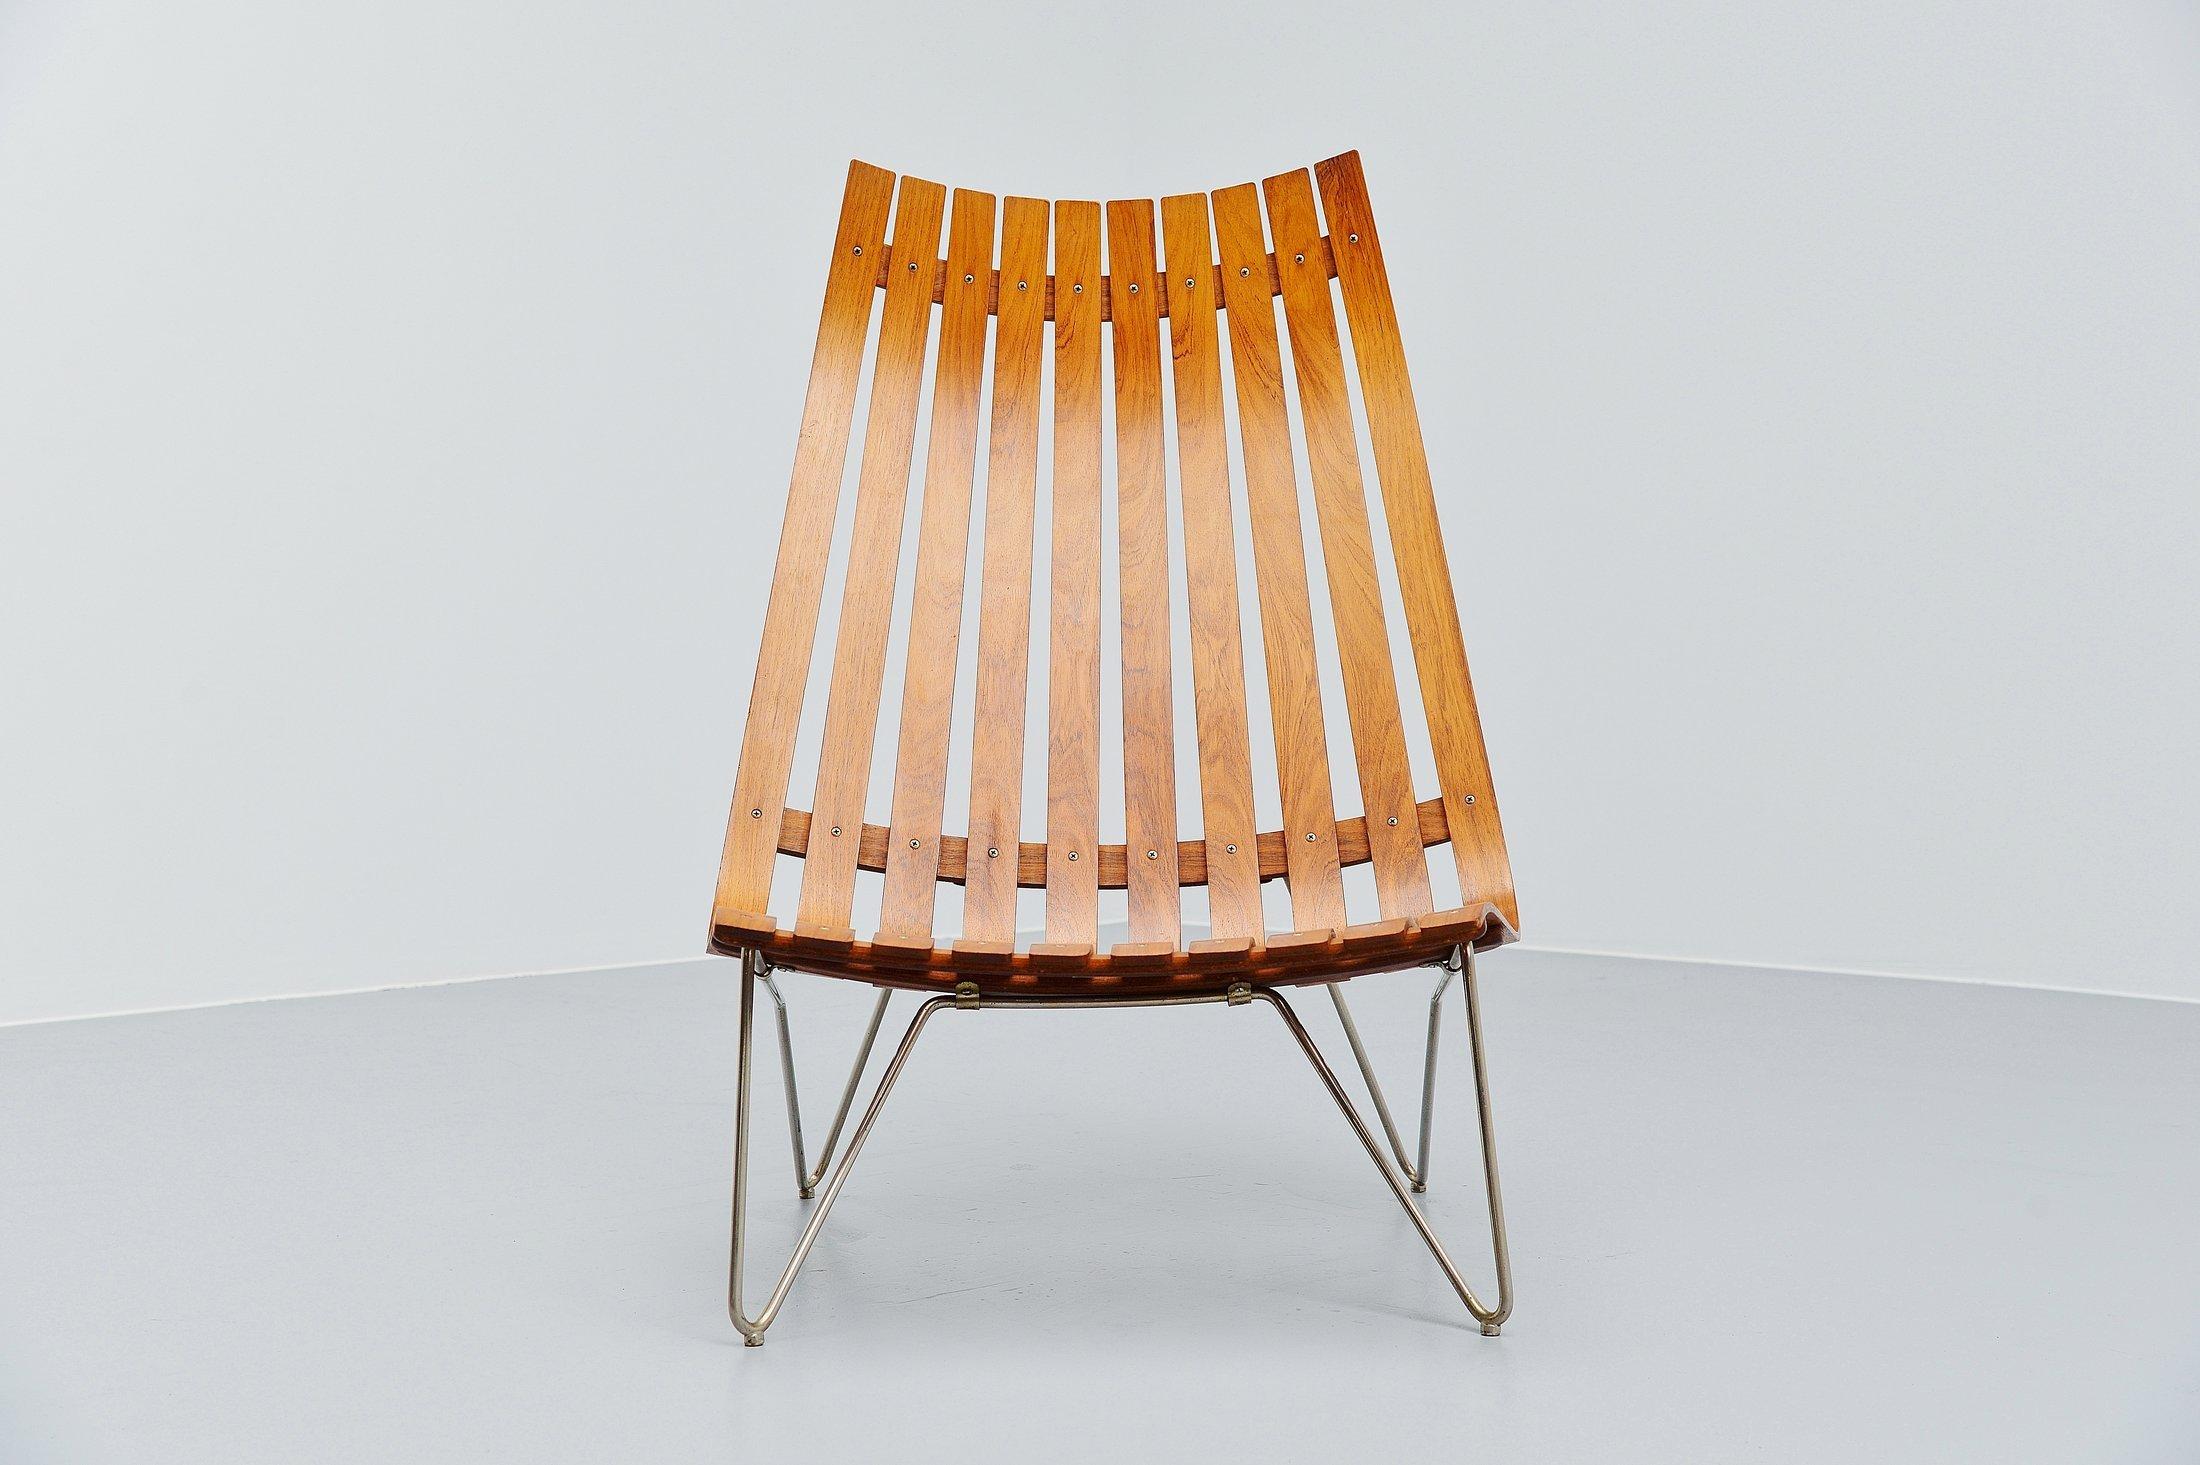 Mid-20th Century Hans Brattrud Scandia Lounge Chair Hove Mobler Norway, 1957